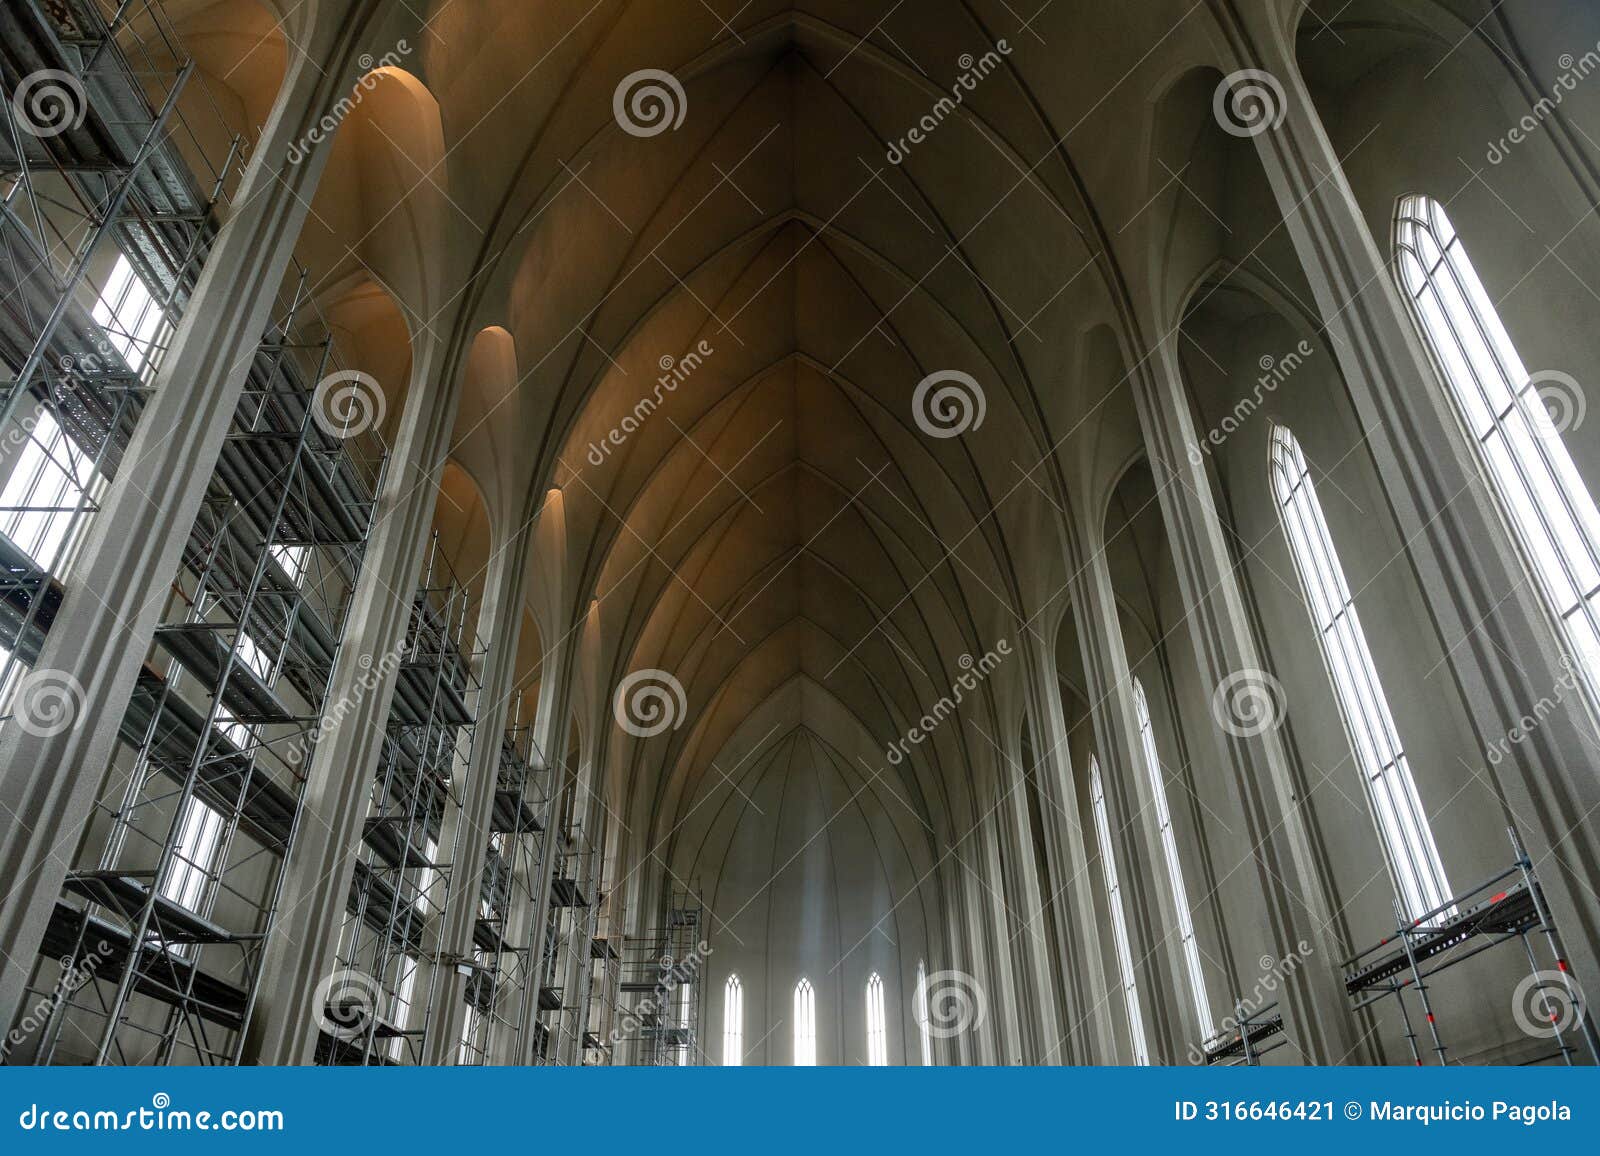 the inside of a church with a lot of arches and windows